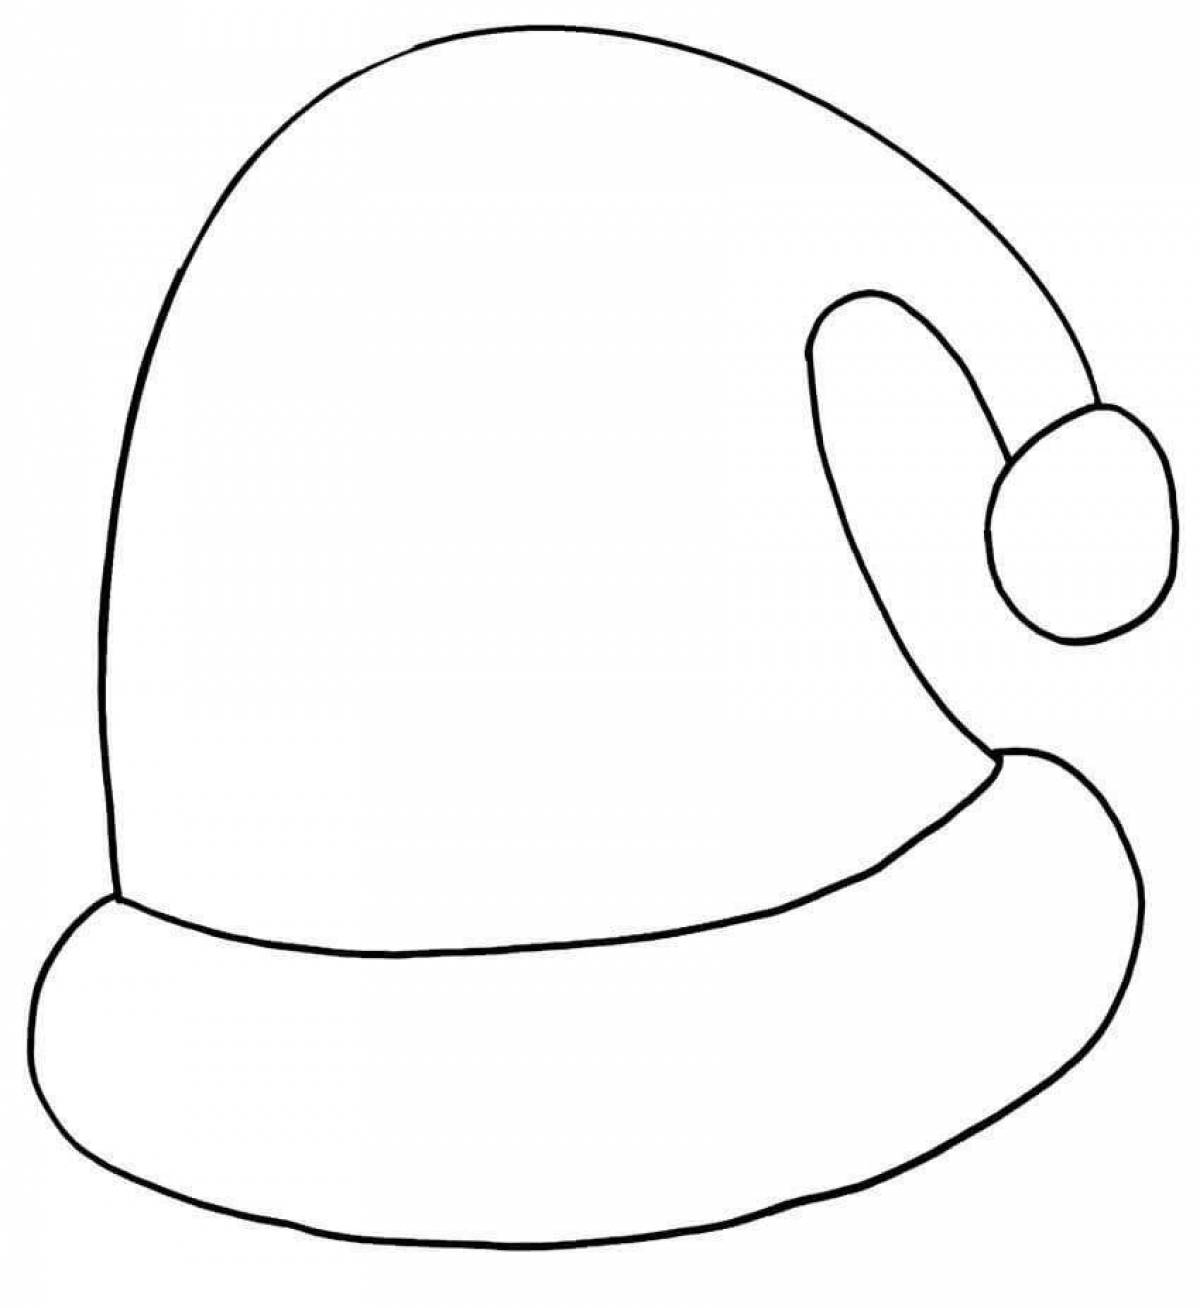 Coloring page wonderful cap for children 2-3 years old